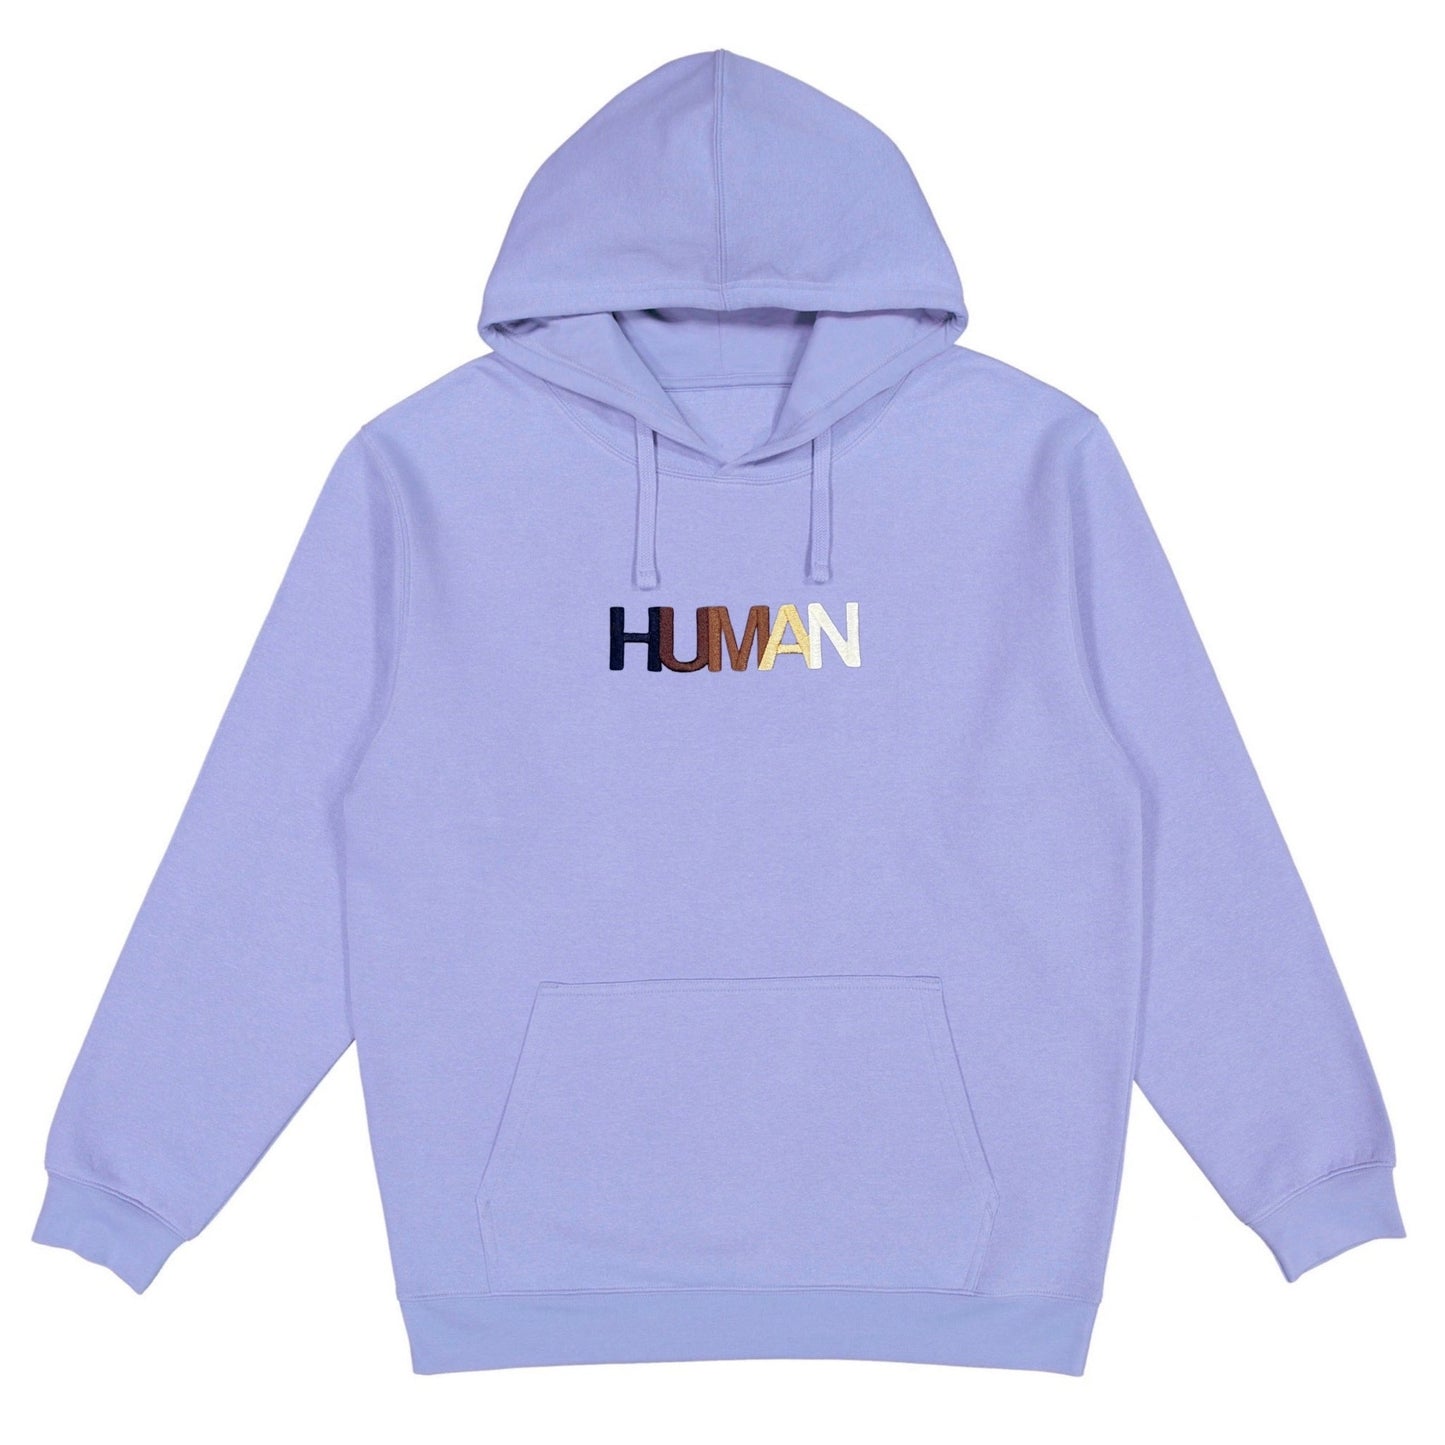 Human Embroidered Hoodie